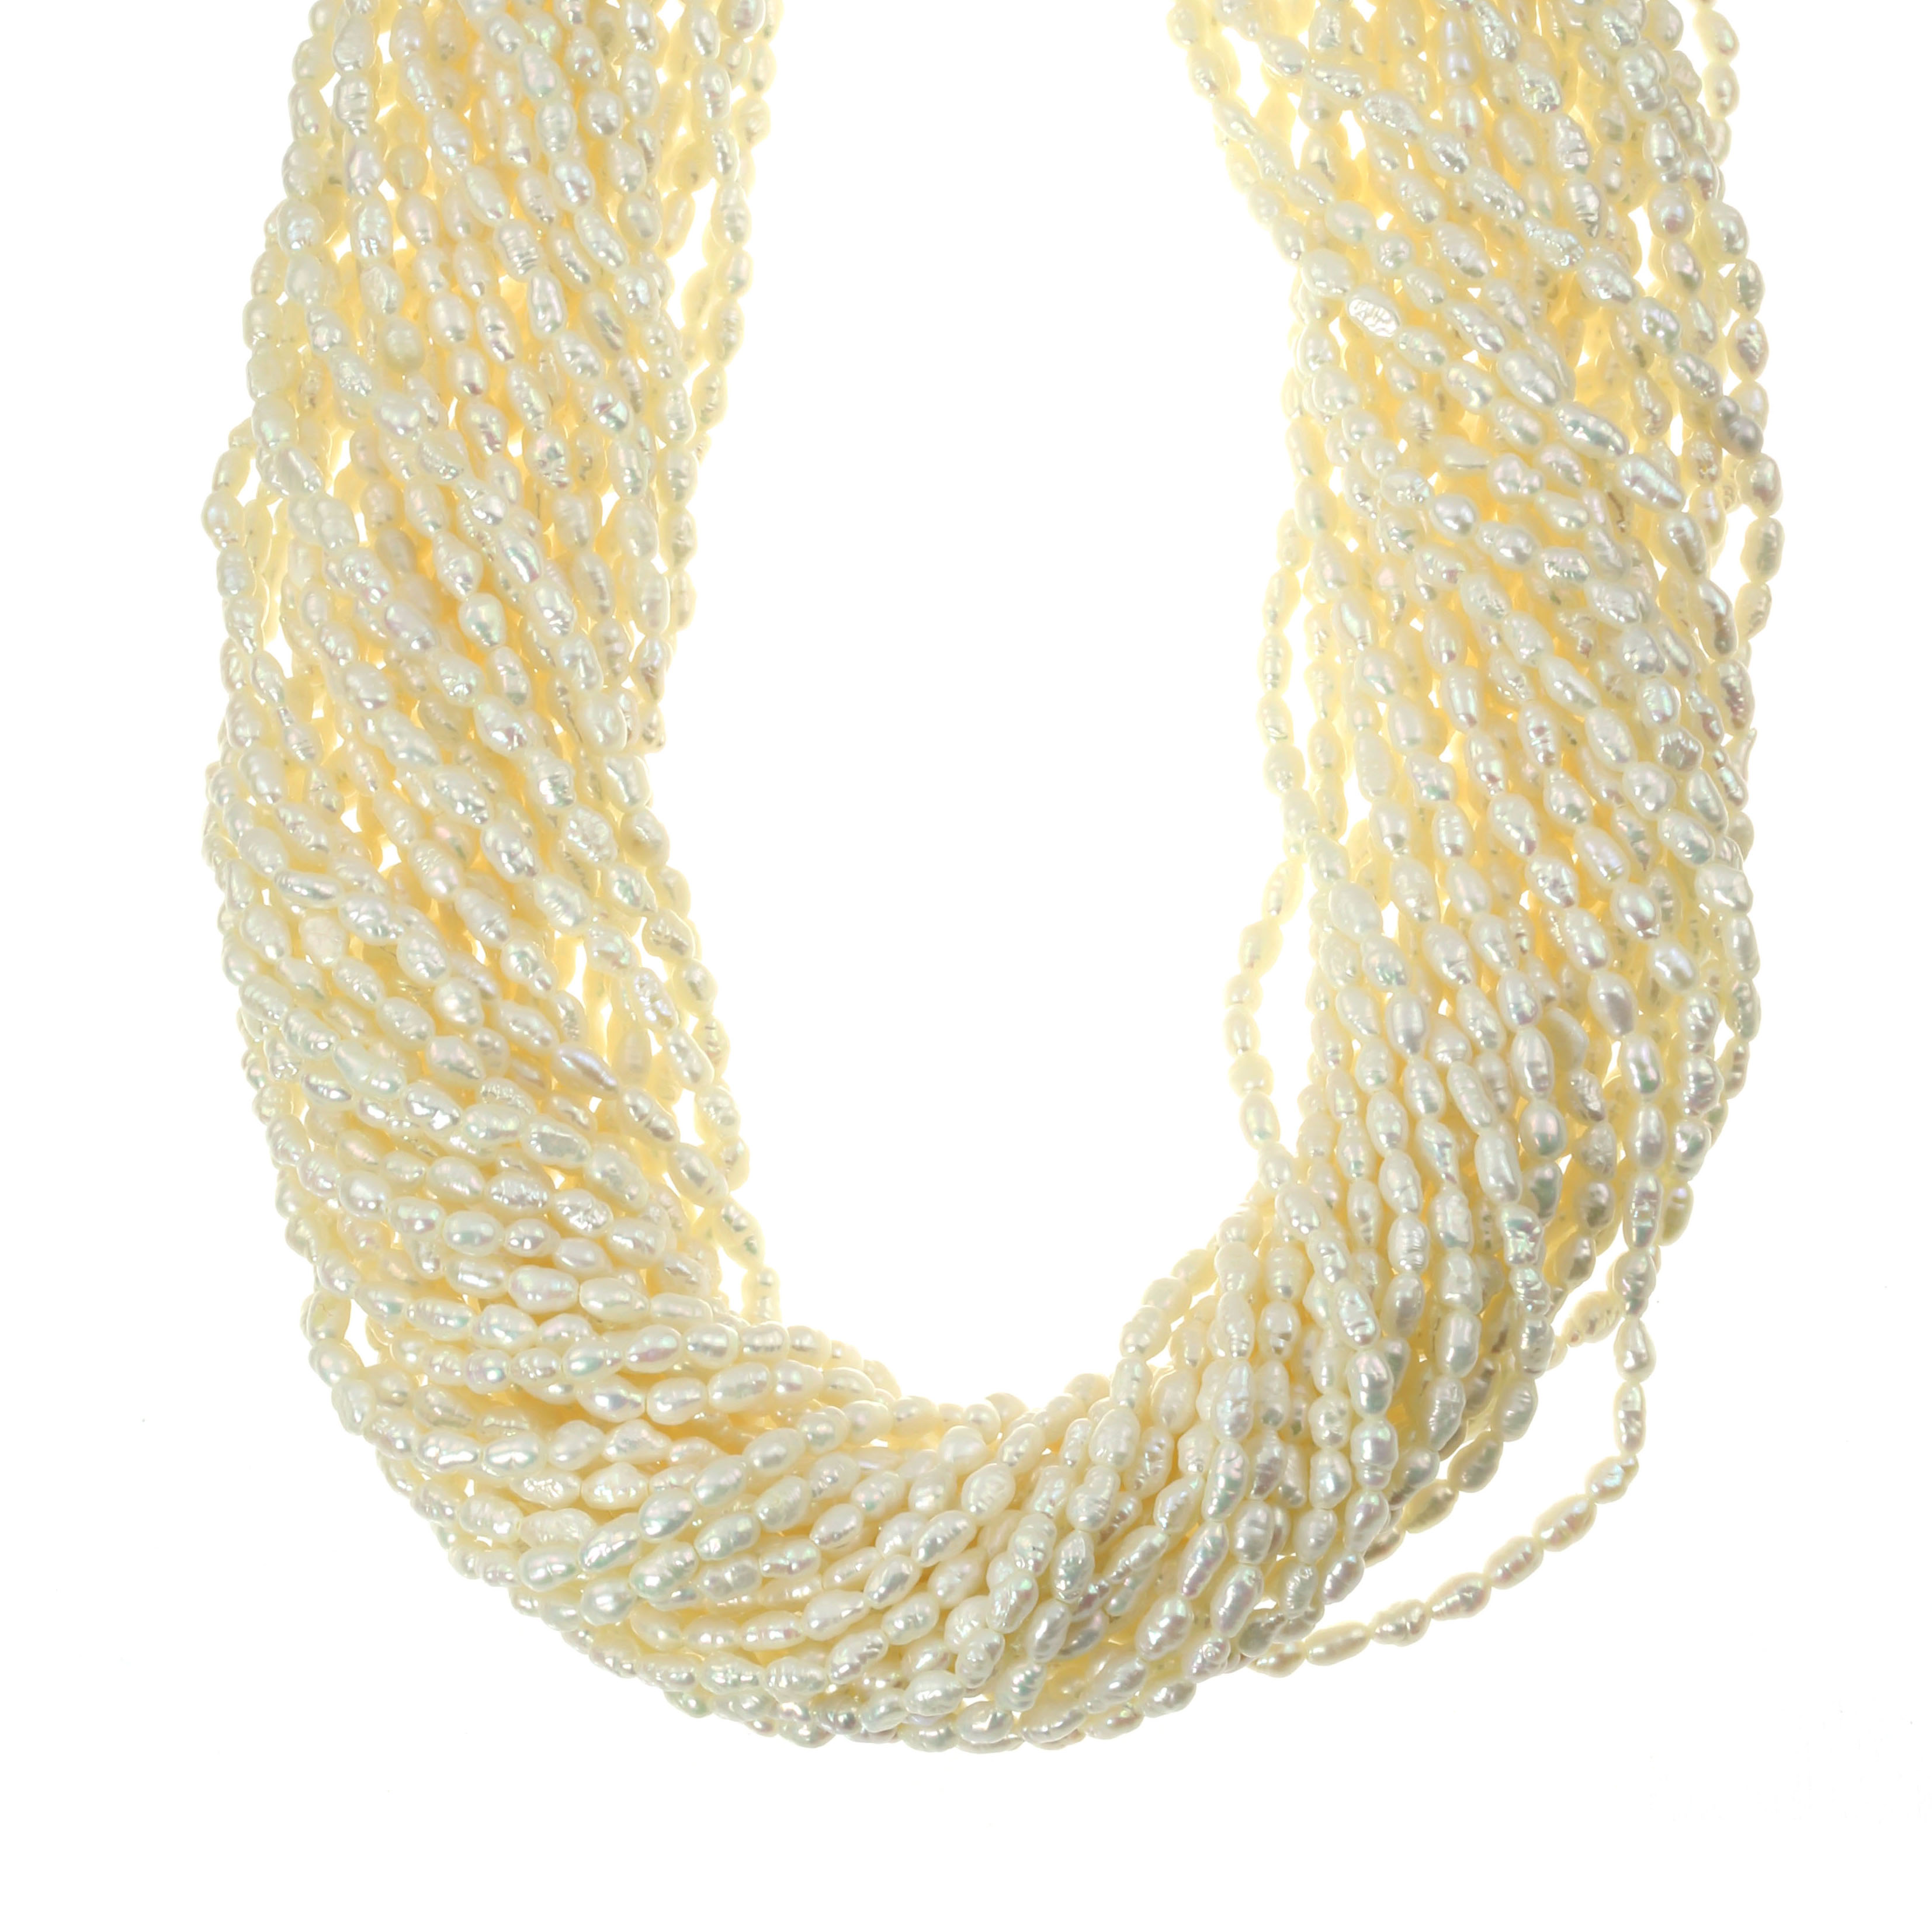 A PEARL TORSAE NECKLACE in 18ct yellow gold, comprising several strands of pearls twisted around